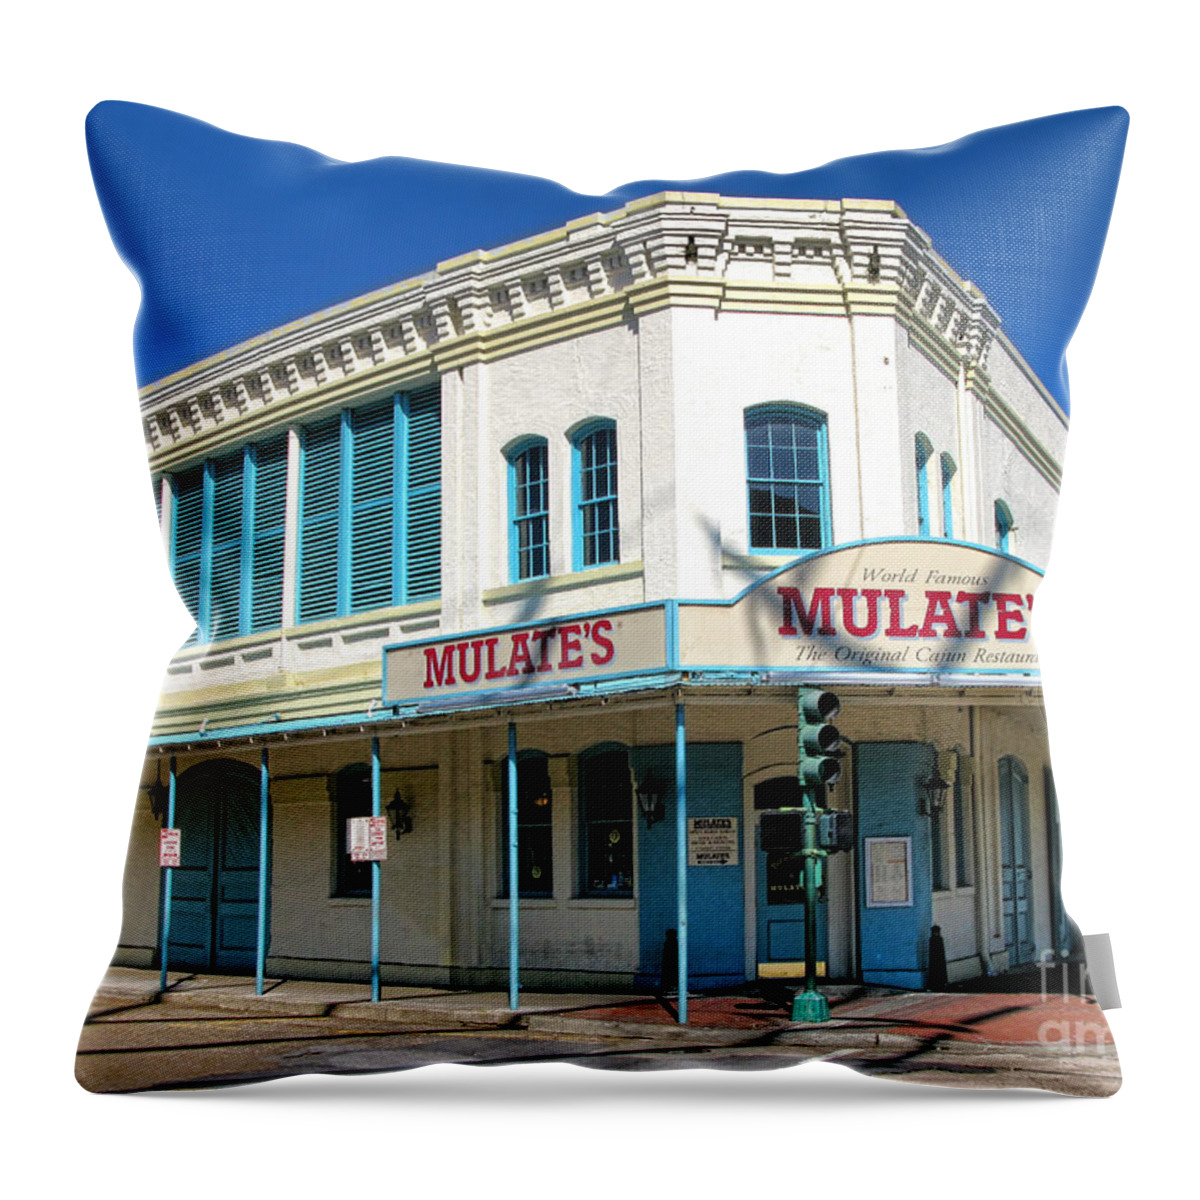 Mulate's Throw Pillow featuring the photograph New Orleans Mulate's by Olivier Le Queinec